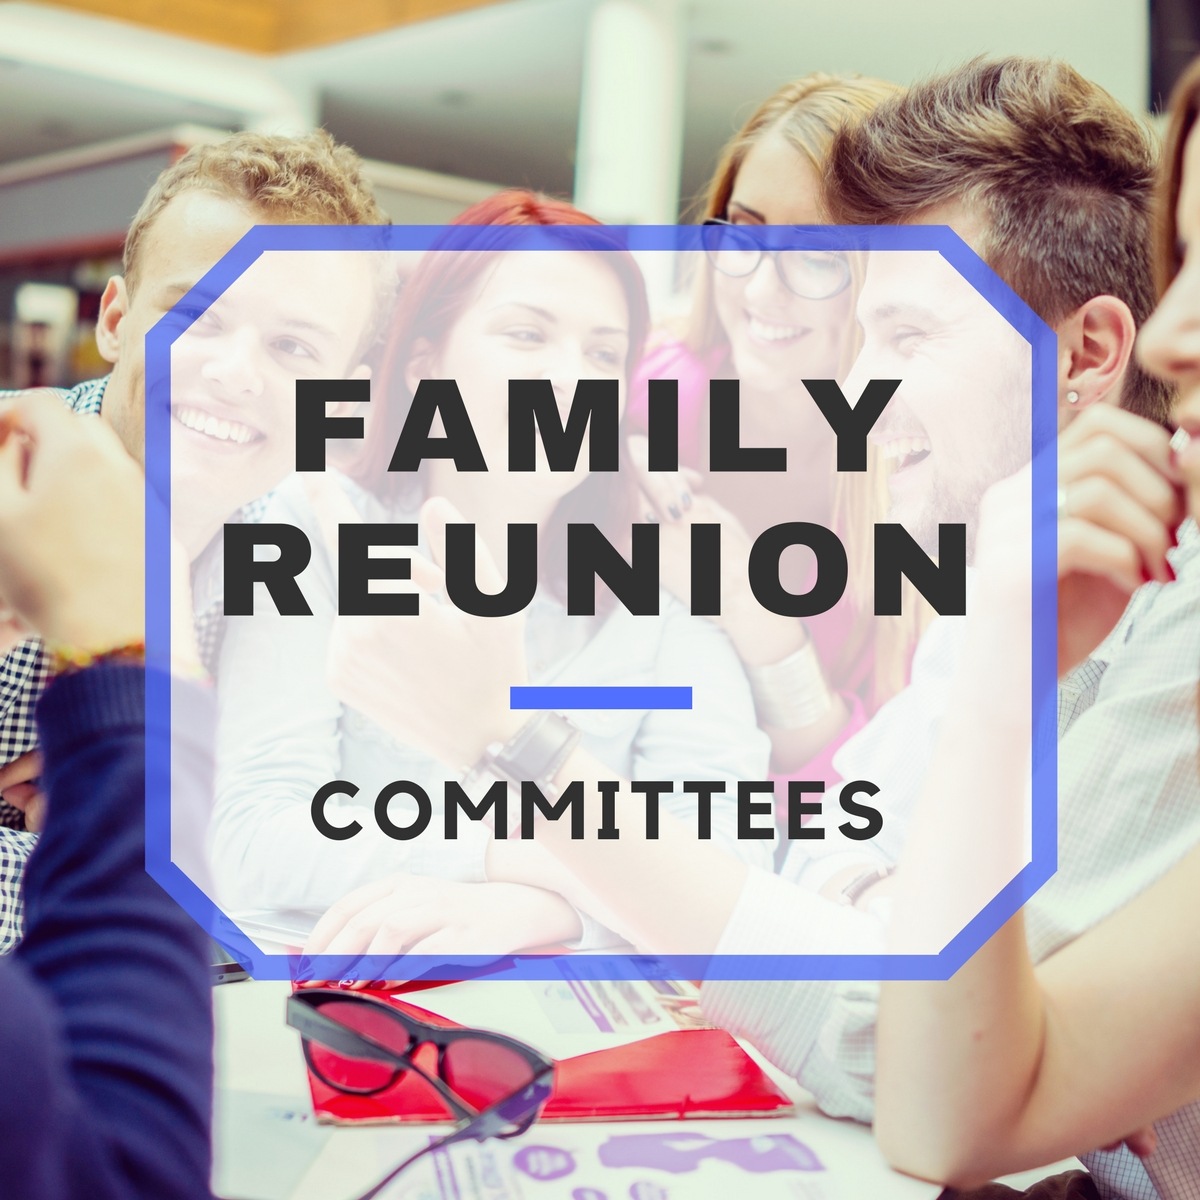 Family Reunion Committees: Everything You Need to Know